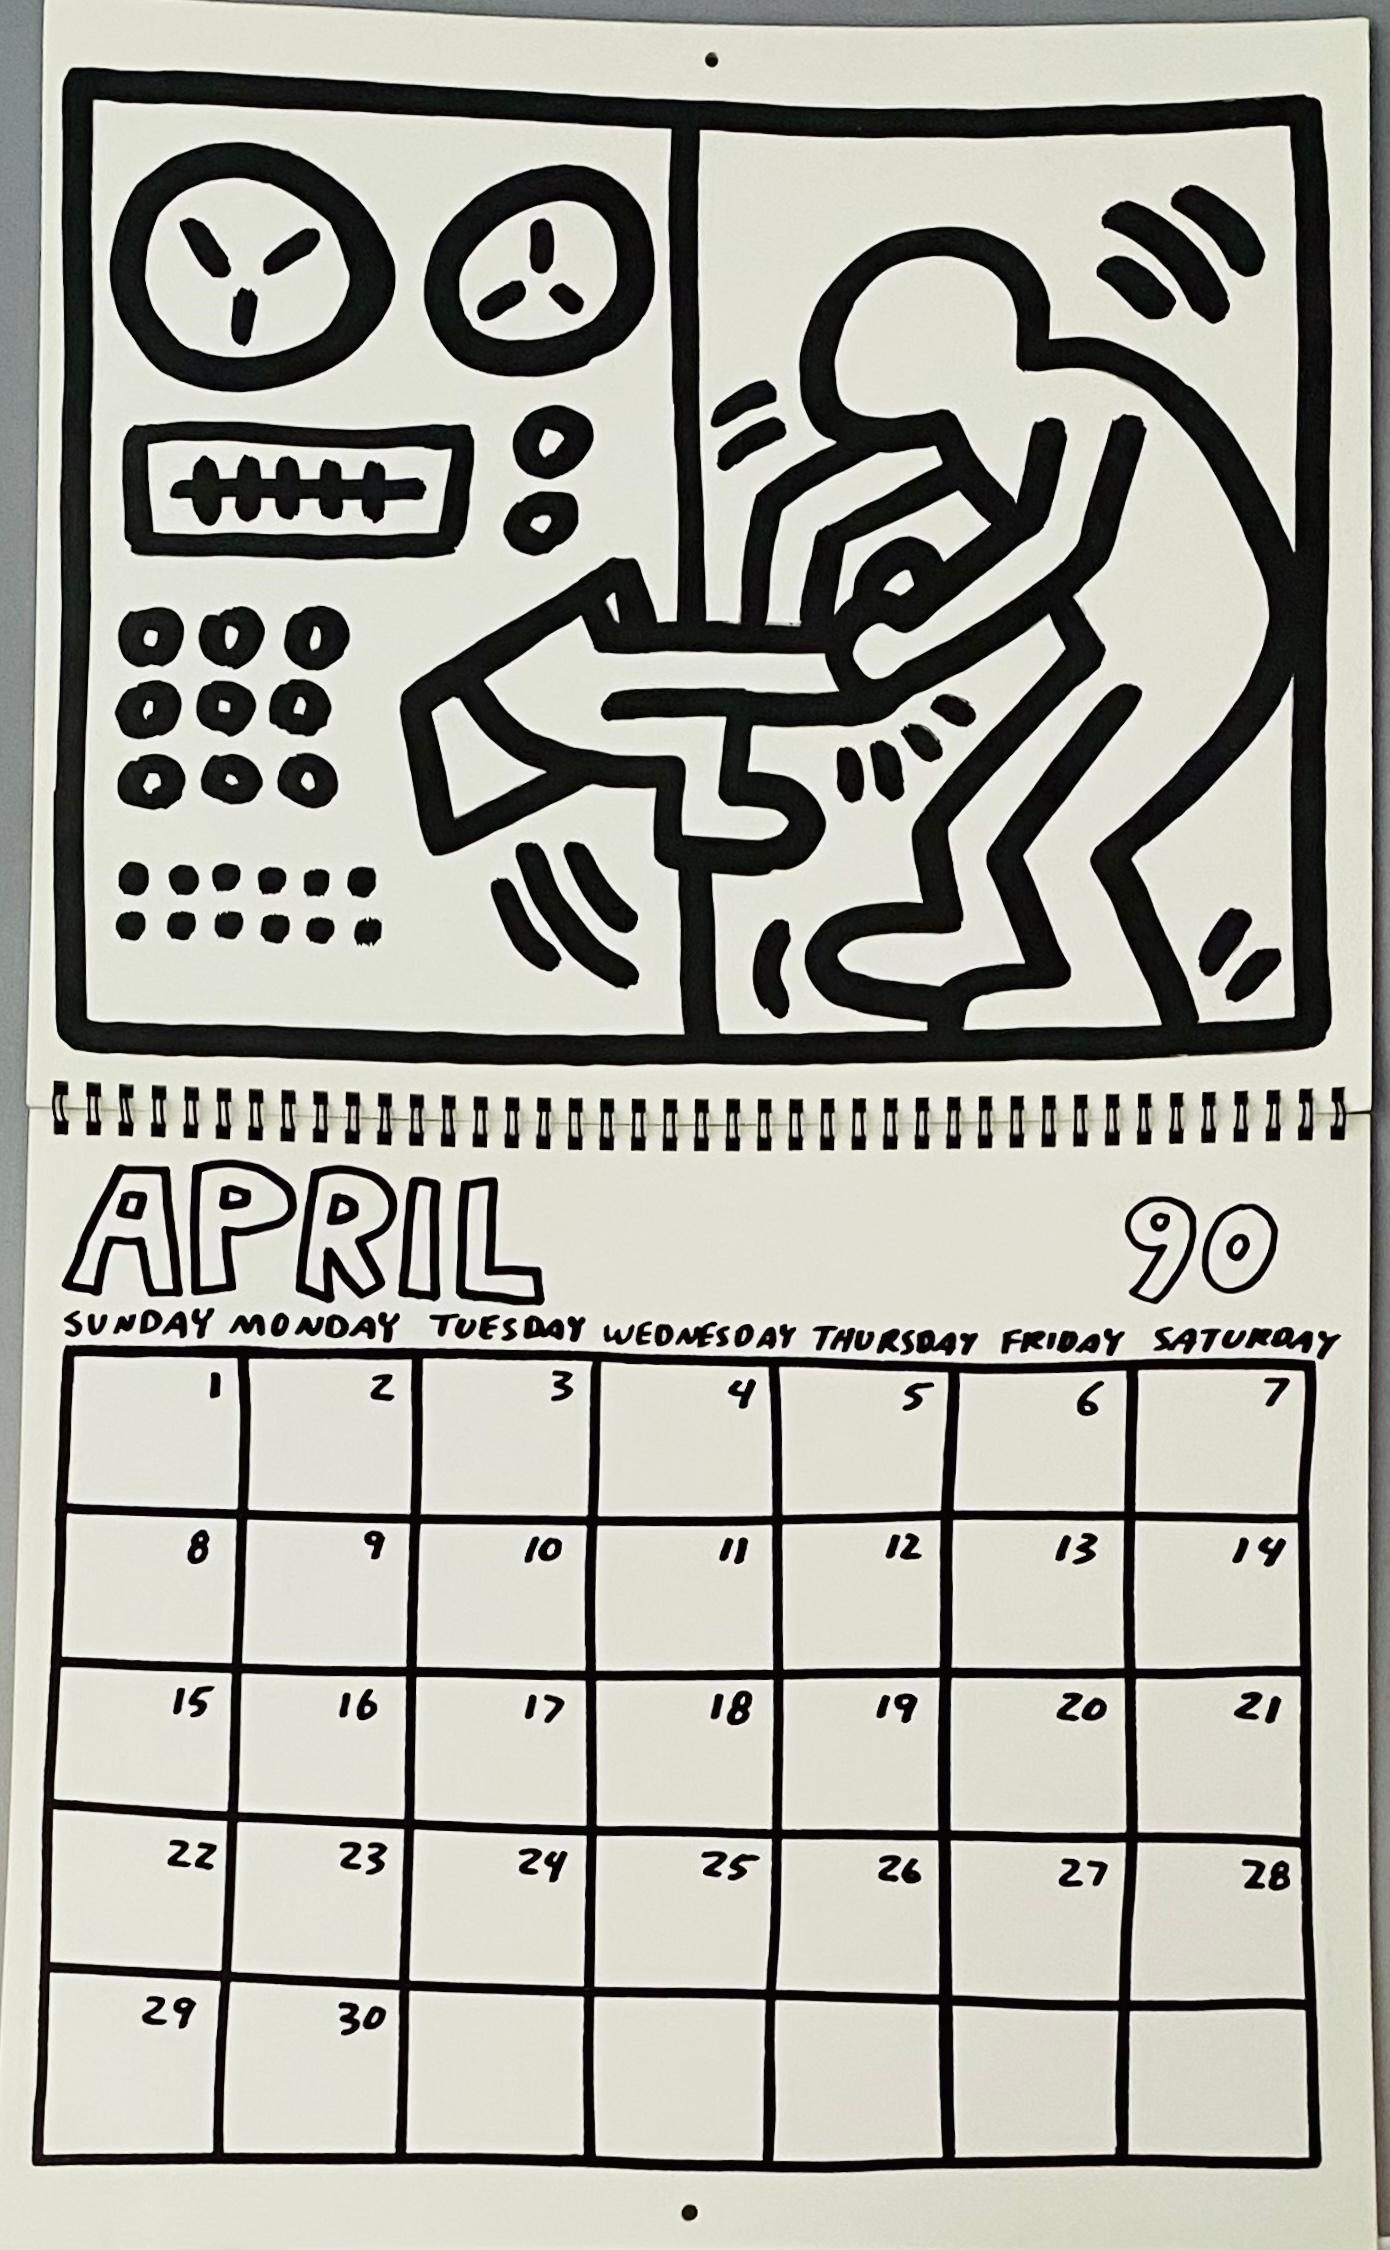 Keith Haring Pop Shop 1989:
Rare Keith Haring illustrated 20 month calendar designed by Haring just months before his passing in February, 1990. The calendar was sold in 1989/90 at Haring's Pop Shop in New York City and features 20 much iconic